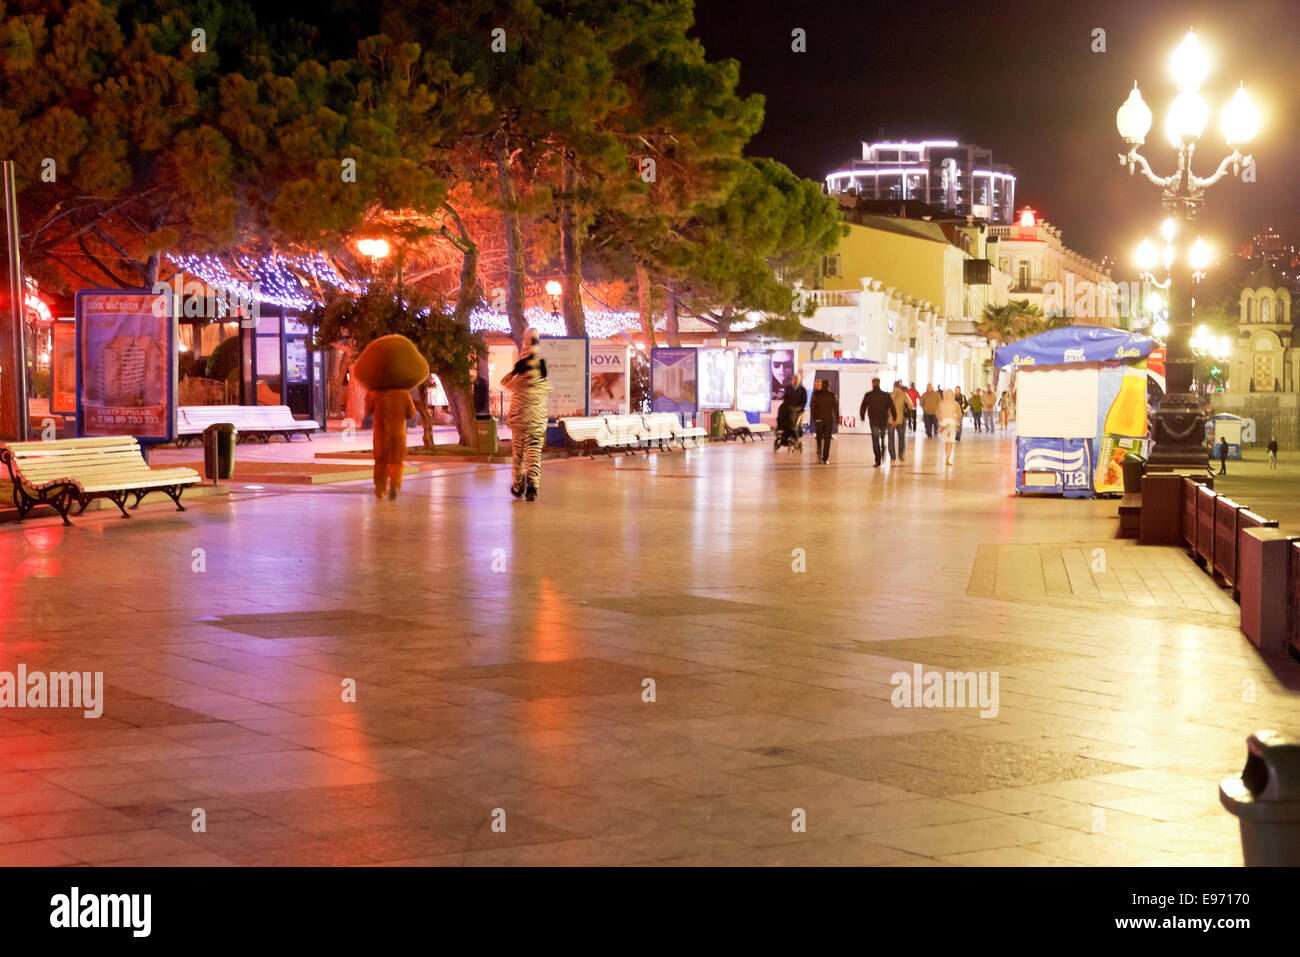 YALTA, RUSSIA - OCTOBER 2, 2014: people walking on quay in Yalta city in night. Yalta is resort city on the north coast of the B Stock Photo